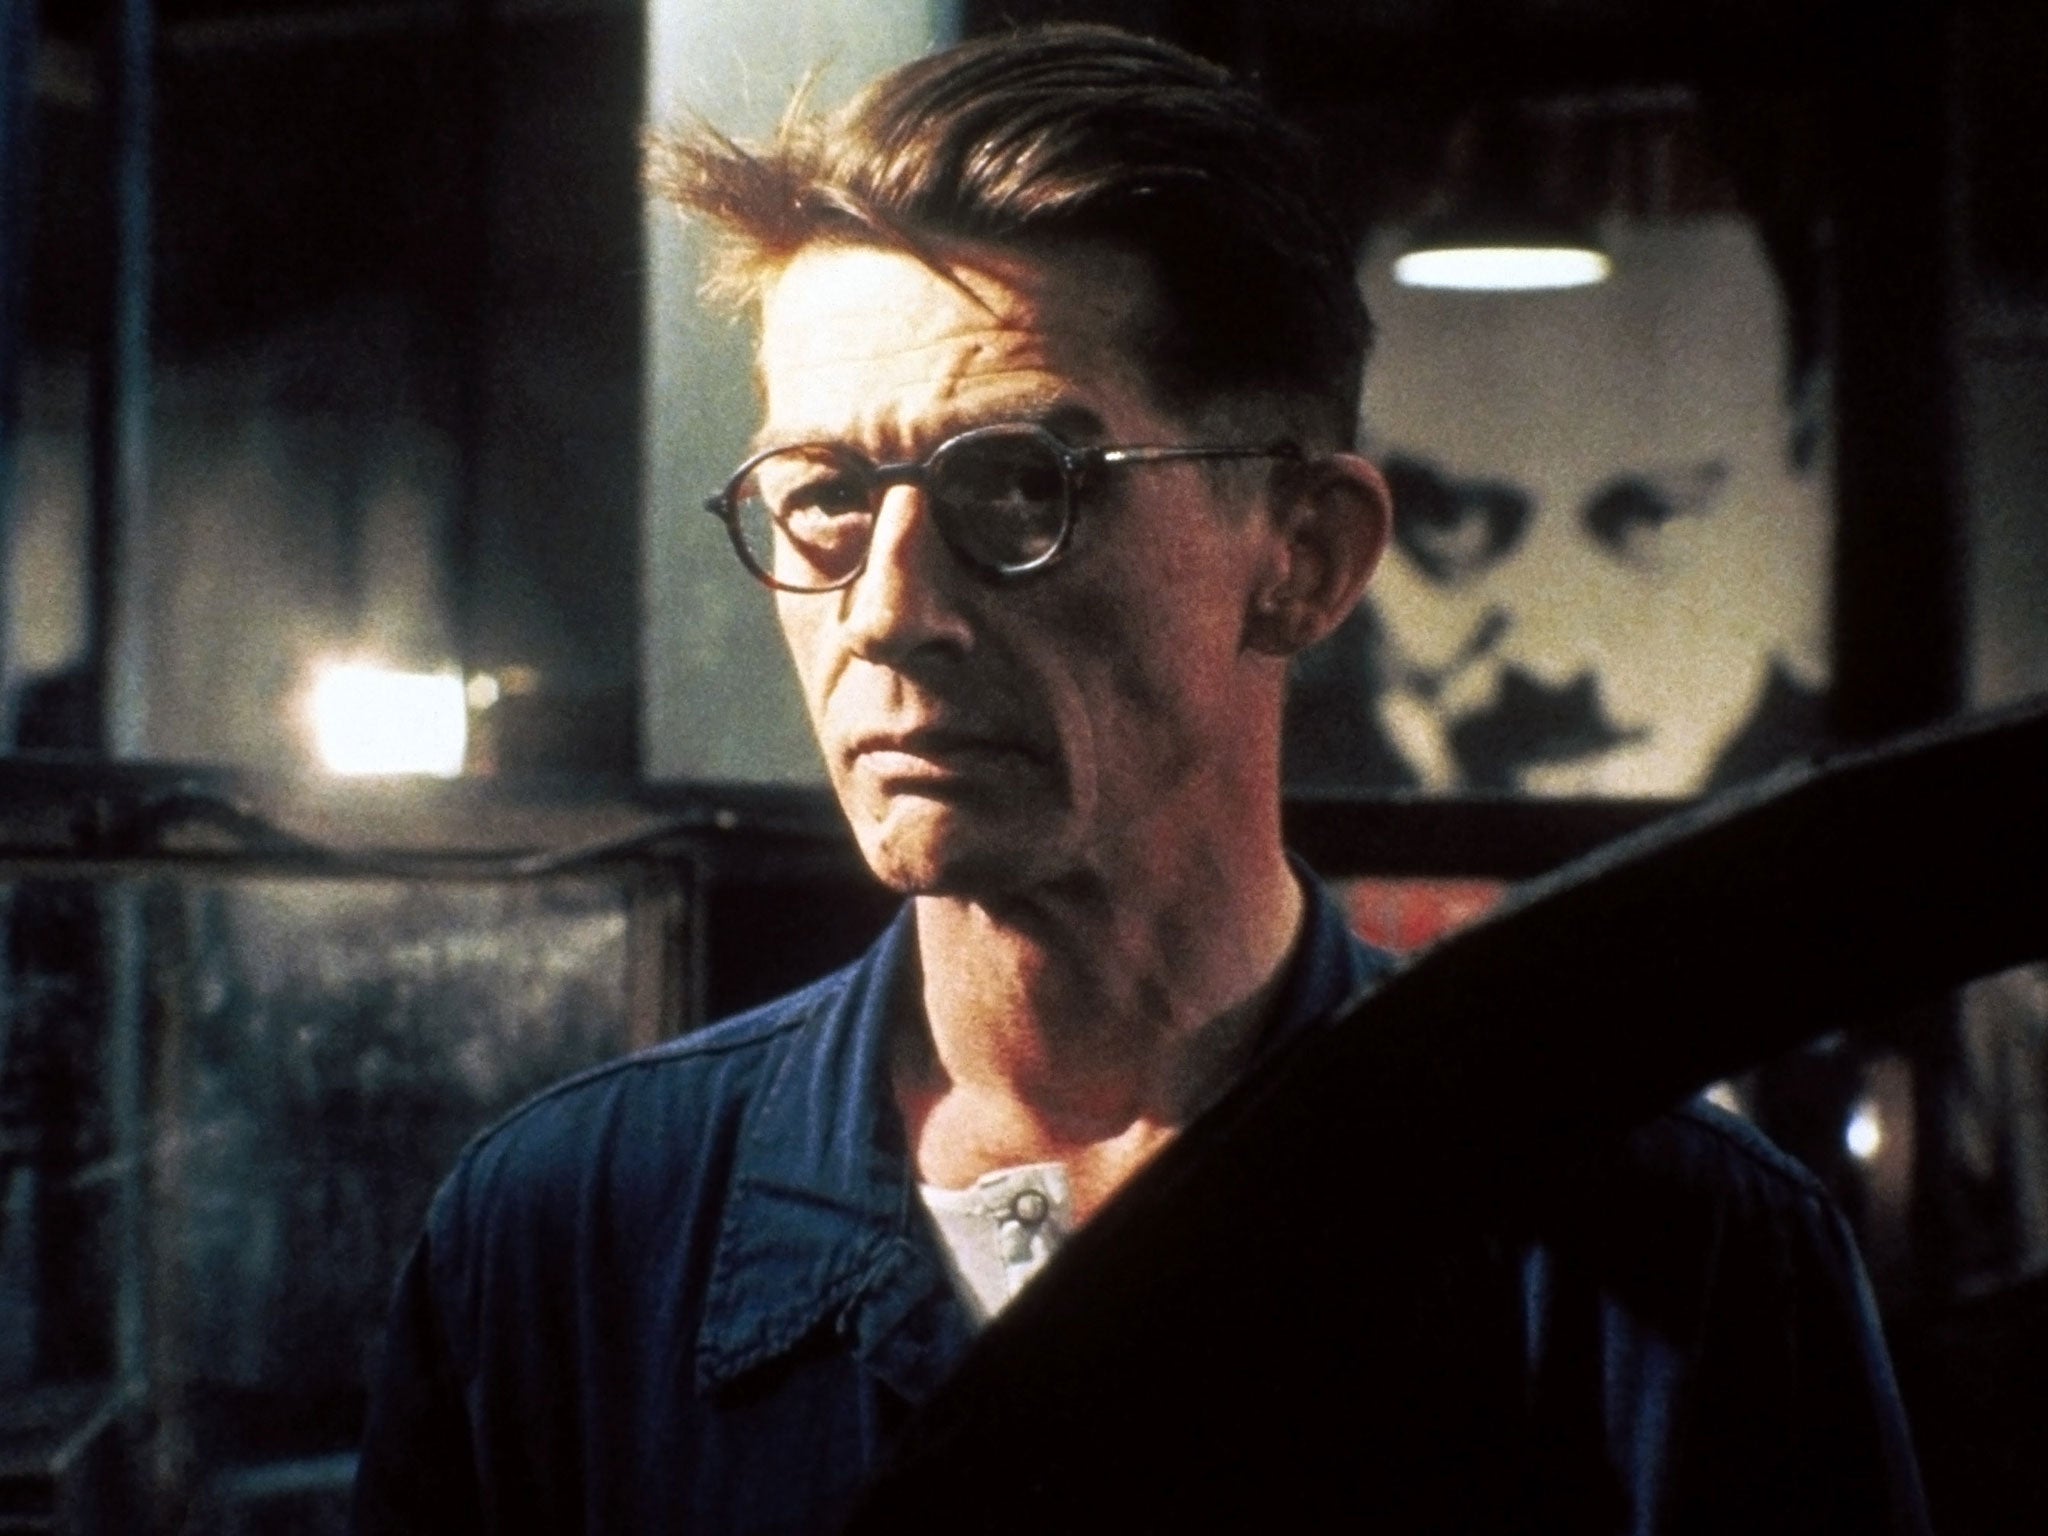 John Hurt as Winston Smith in the film version of 1984